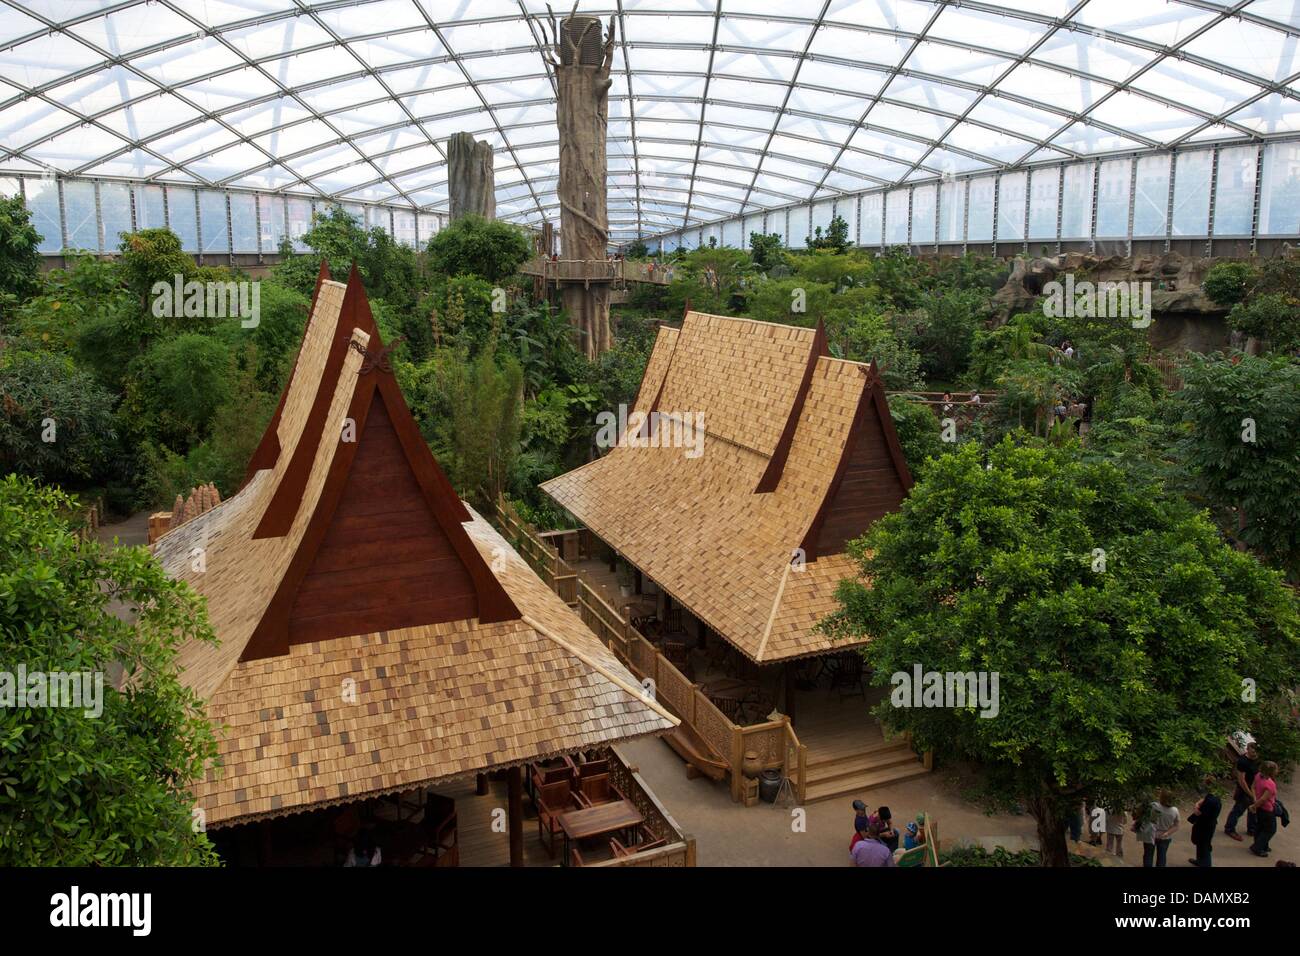 The large tropical hall 'Gondwanaland' is pictured at the zoo in Leipzig, Germany, 01 July 2011. On 01 July, the Leipzig Zoo officially opened the tropical hall Gondwanaland for visitors. The hall which is named after the supercontinent Gondwana brings the tropical forest right into the city. 300 animals from 40 species and 17,000 tropical plants inhabit Gondwana. Photo: PETER ENDI Stock Photo